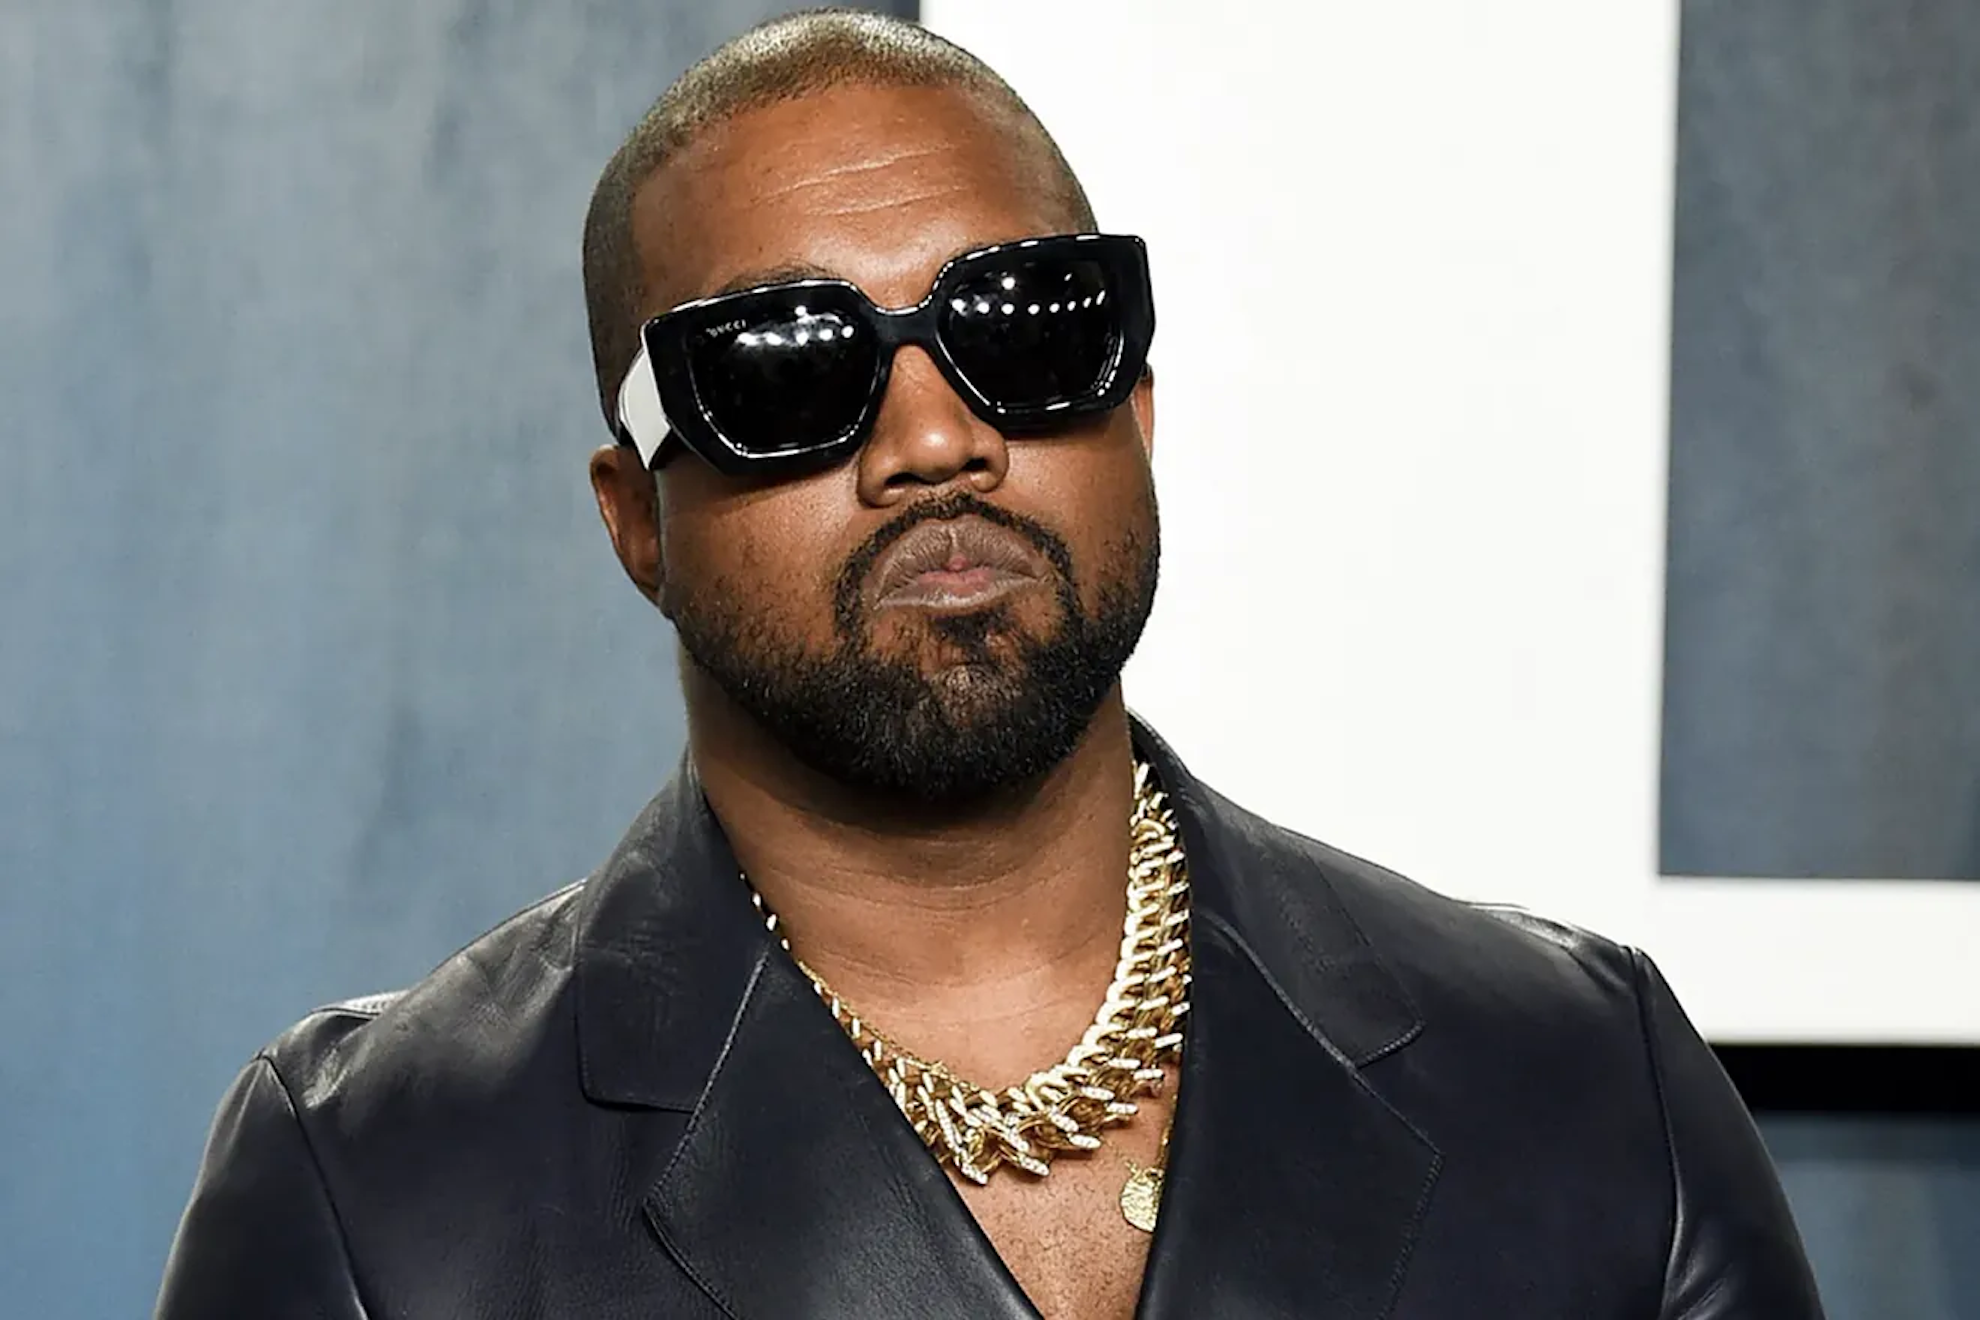 Kanye West sued by ex-bodyguard as rapper faces discrimination accusations